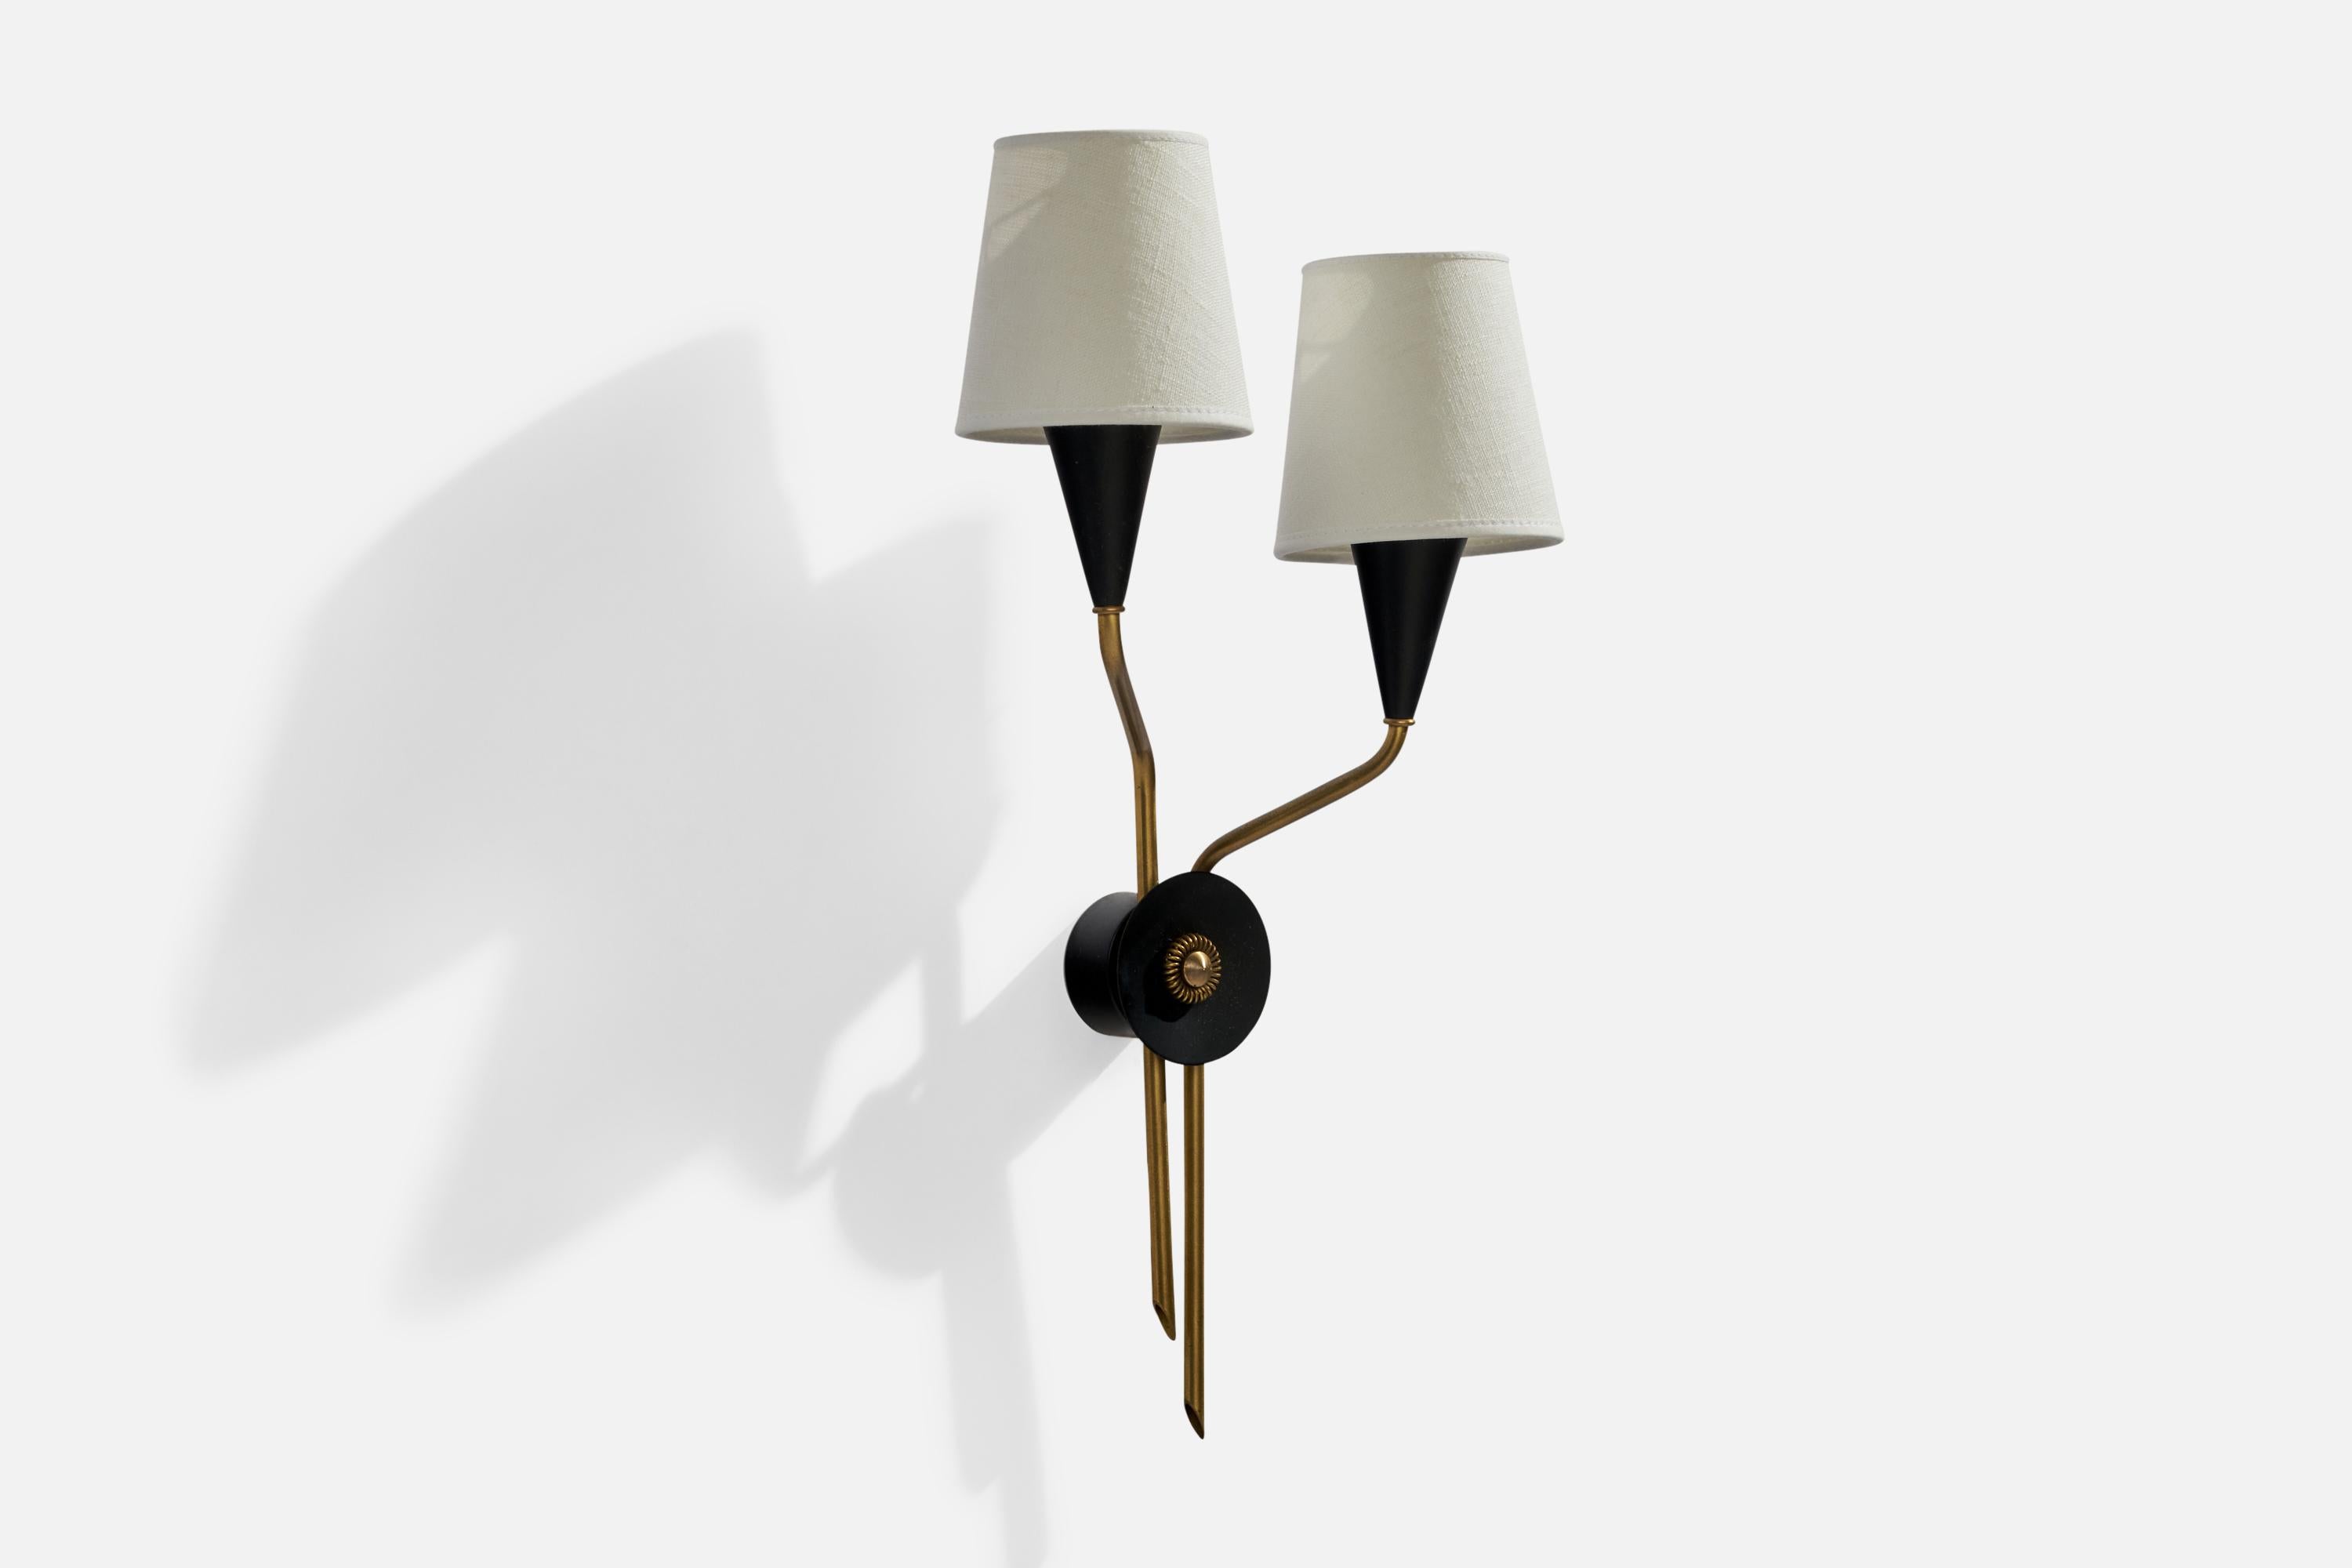 A brass, white fabric and black-lacquered metal wall light designed and produced in Sweden, 1950s.

Overall Dimensions (inches): 18” H x 9”  W x 5.25”  D
Back Plate Dimensions (inches): 2” H x 2”  W x 1”  D
Bulb Specifications: E-14Bulb
Number of